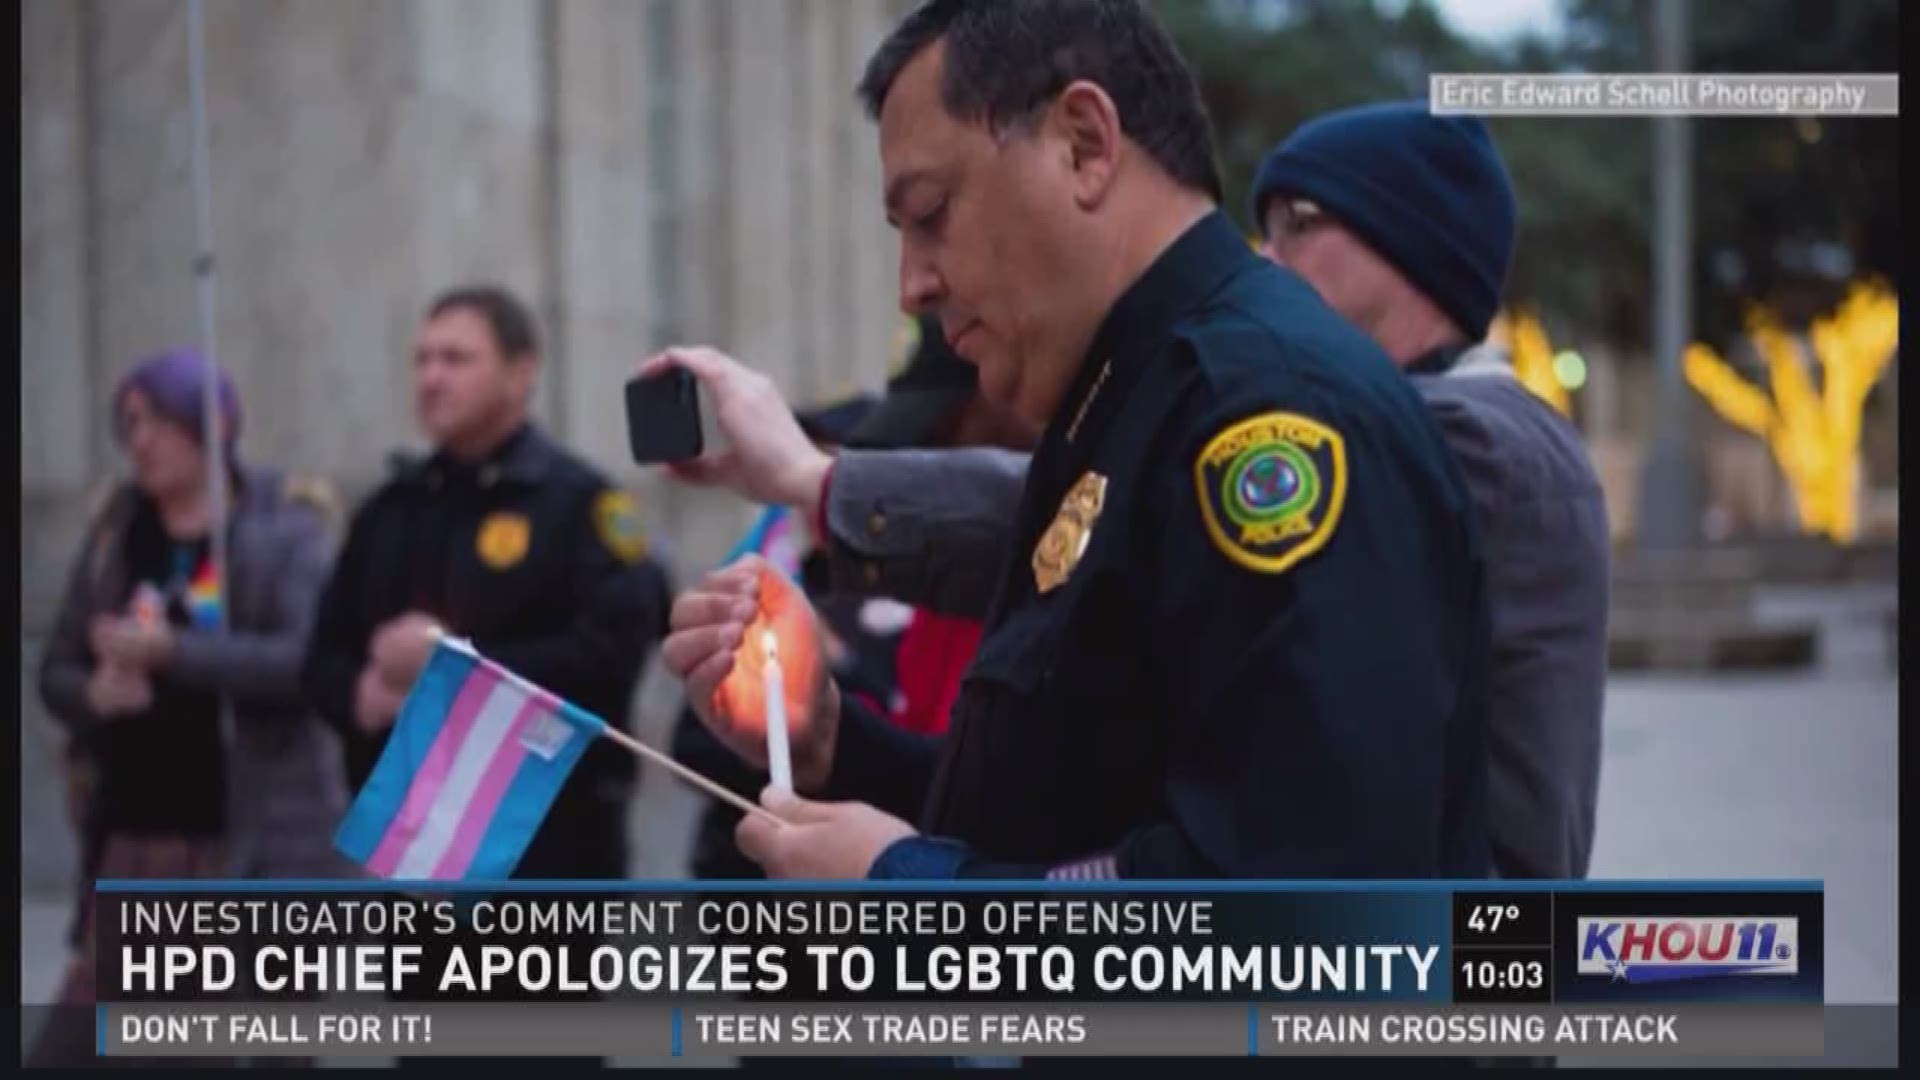 Houston Police Chief Art Acevedo apologized Friday for a statement made by an HPD investigator earlier this week on a murder case involving the death of a transgender woman. 